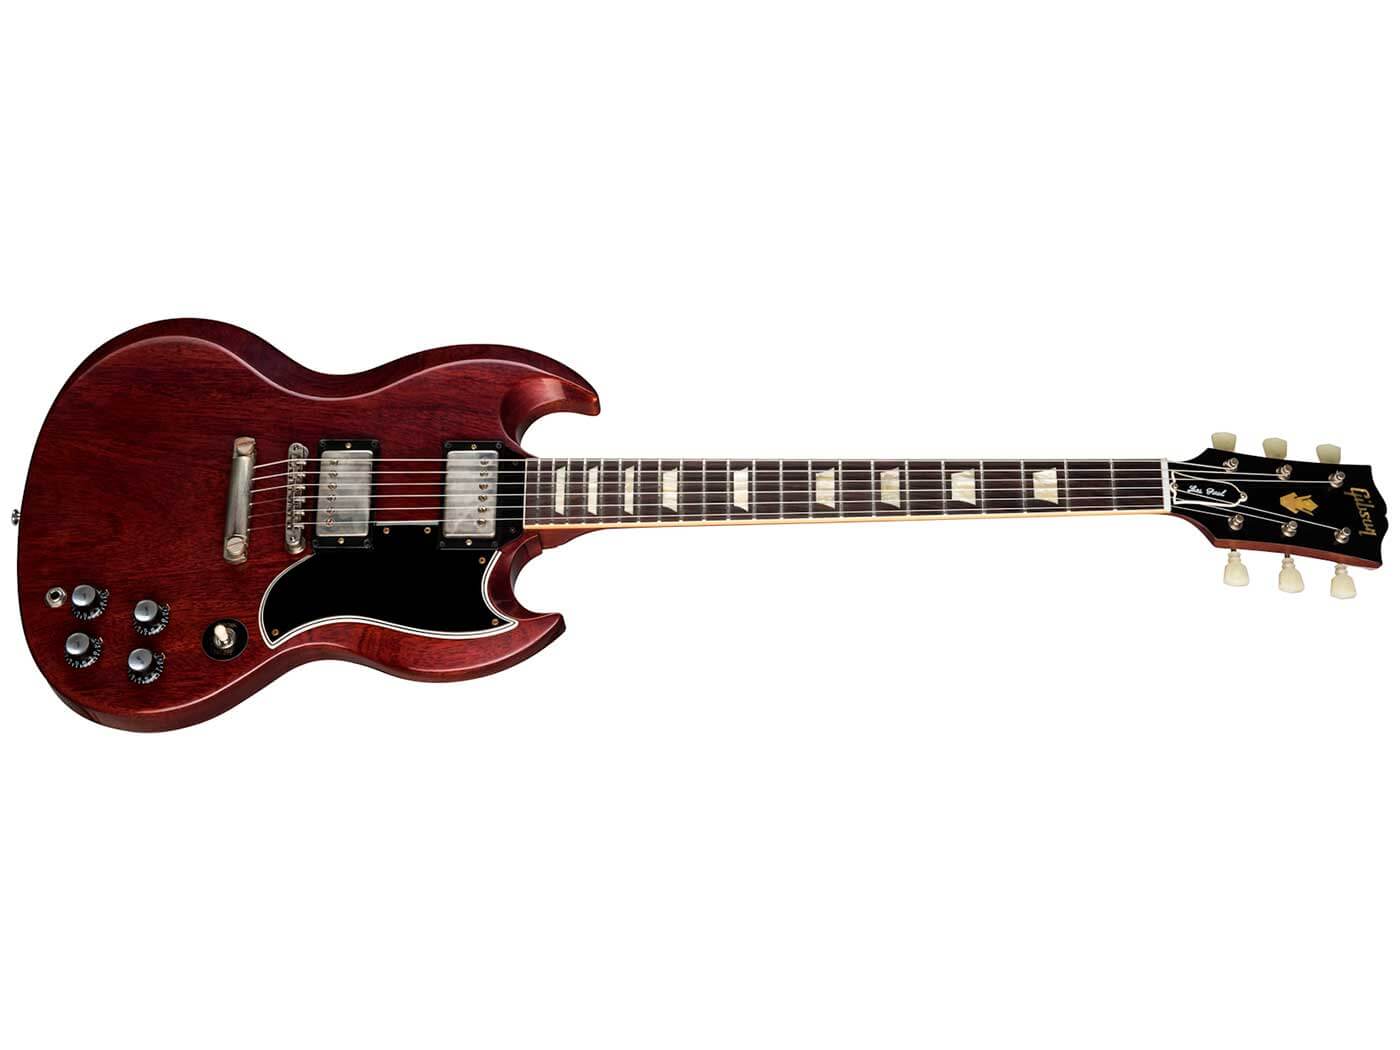 The Gibson SG Standard '61 Stopbar.